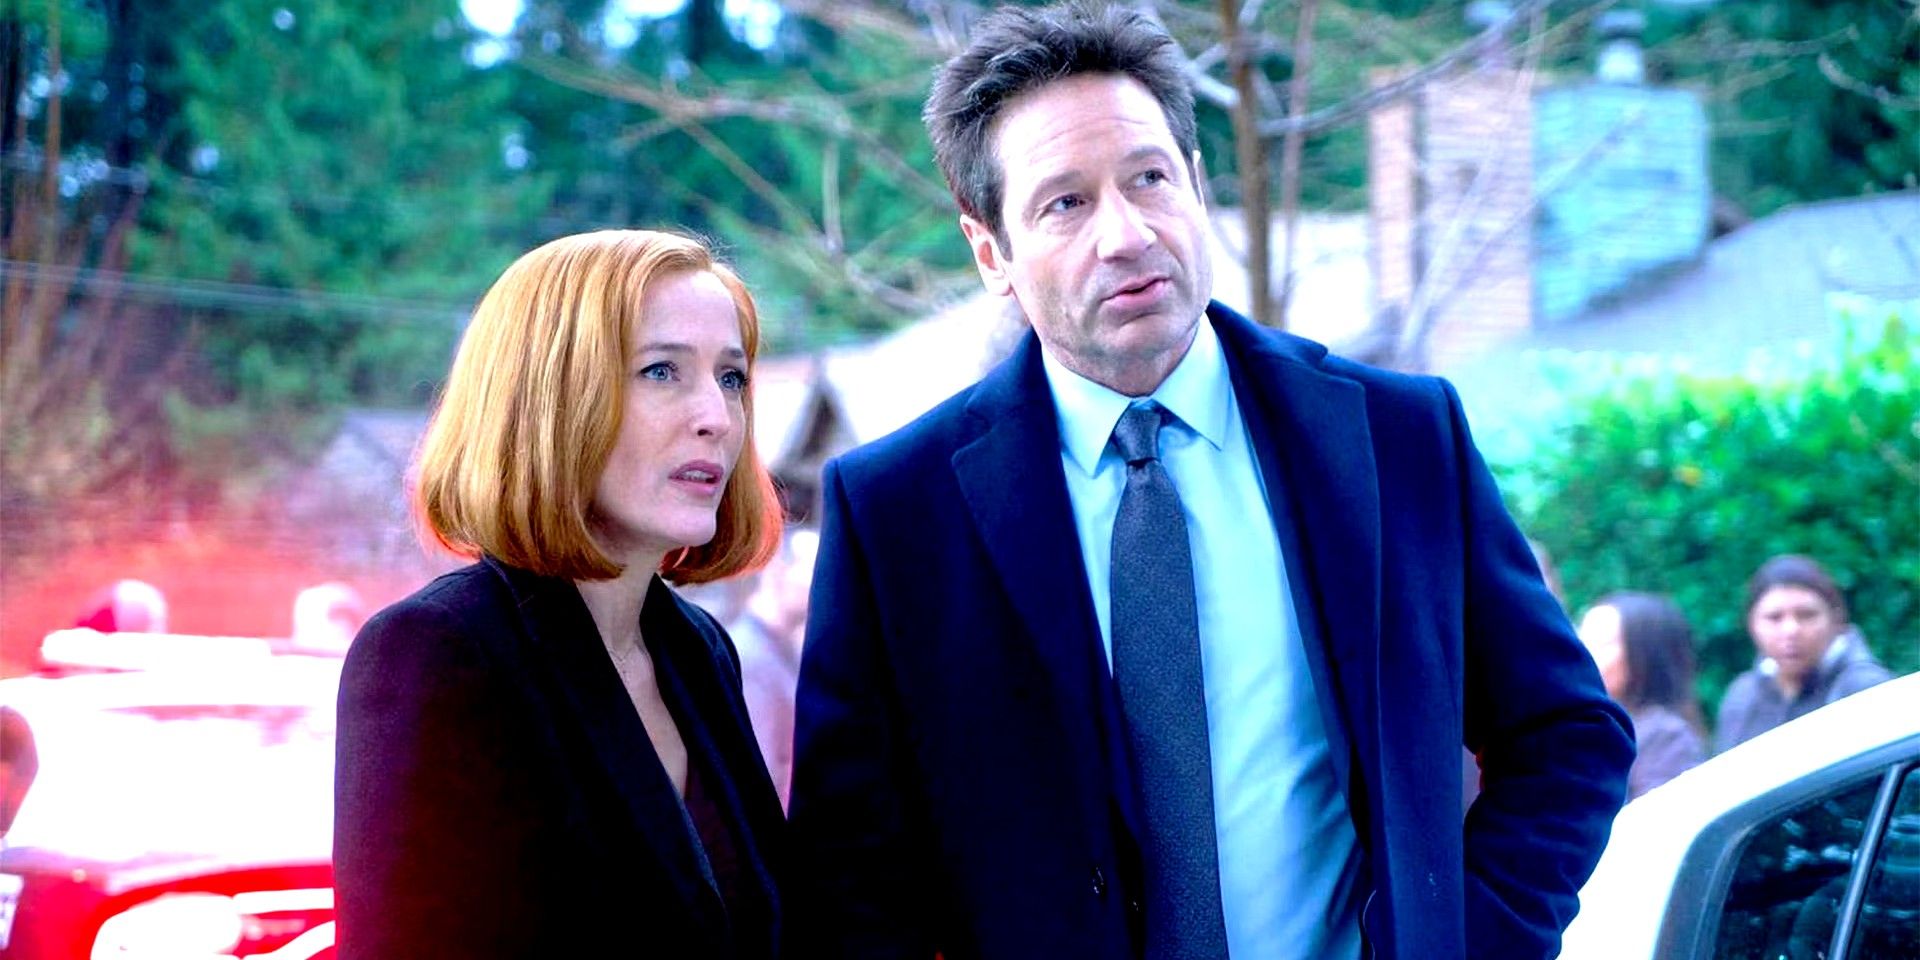 Gillian Anderson and David Duchovny standing together in a scene from The X-Files season 11-1